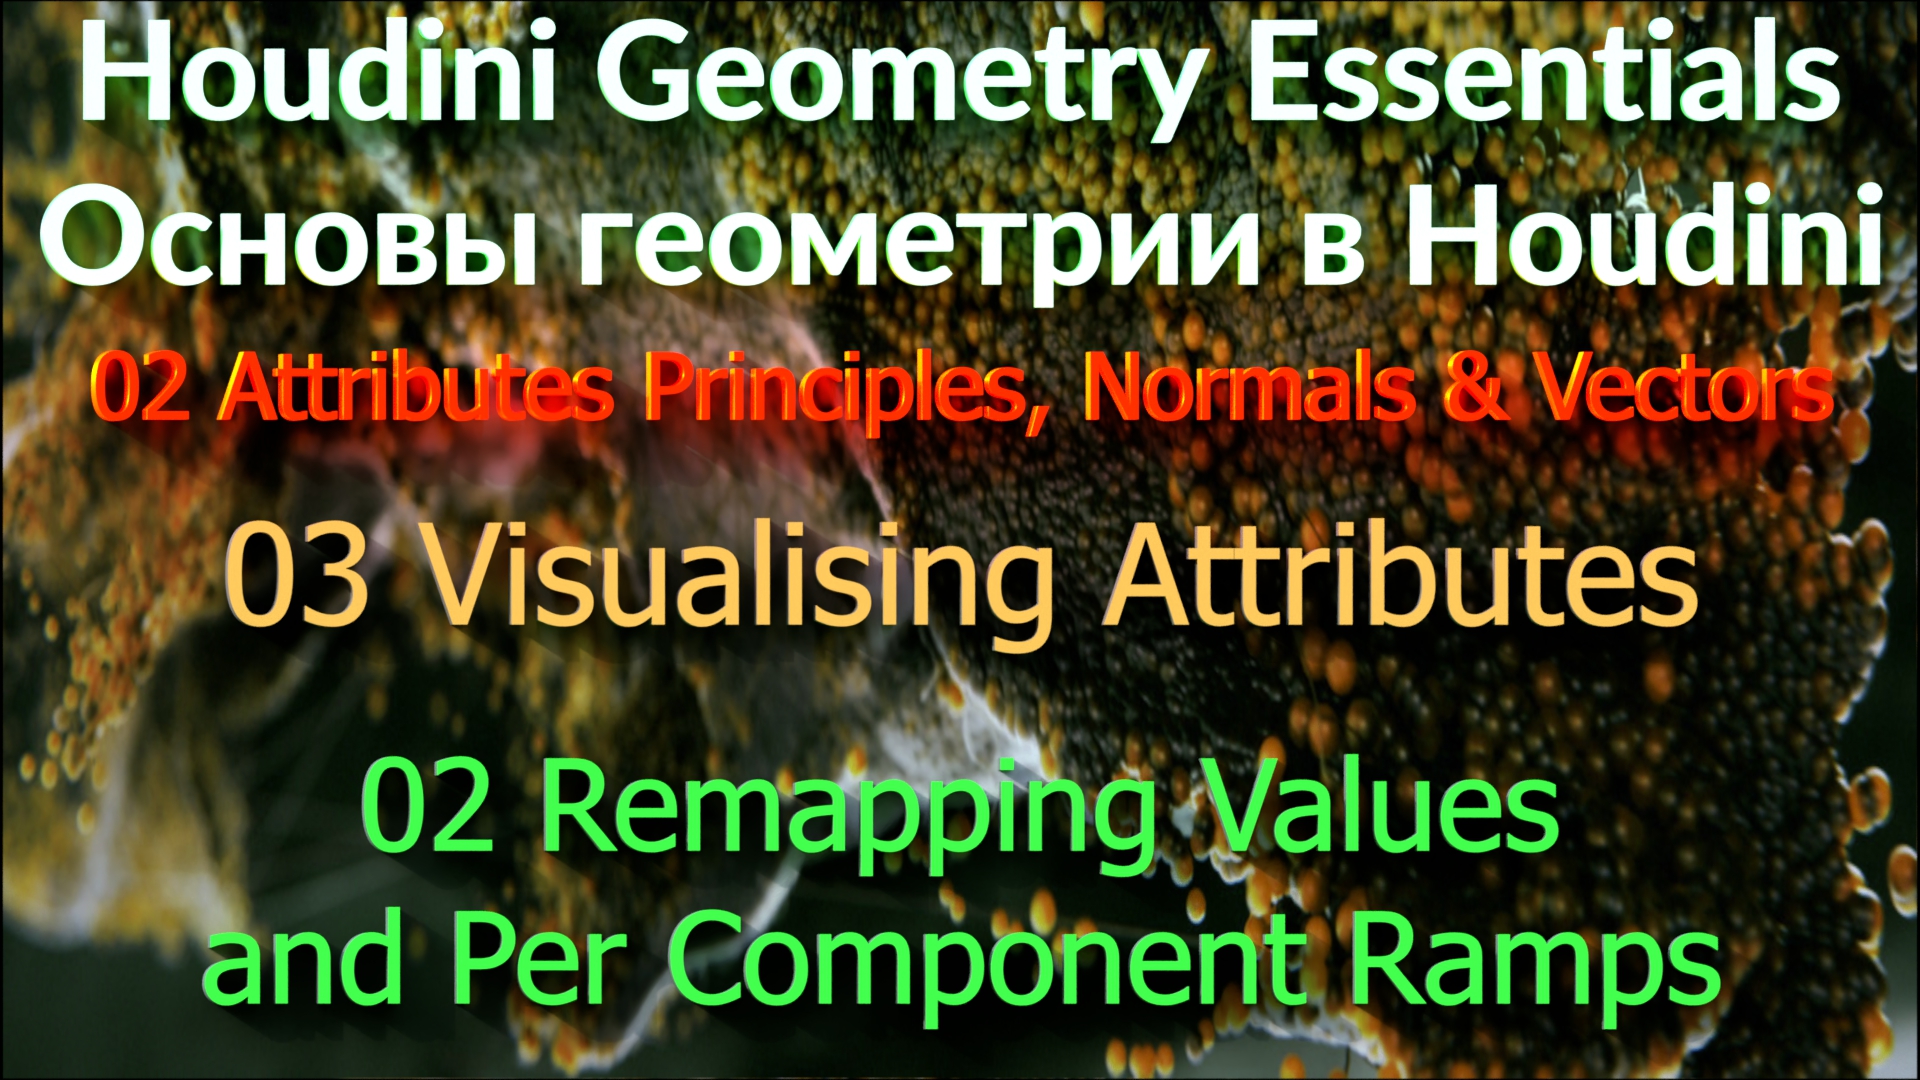 02_03_02 Remapping Values and Per Component Ramps